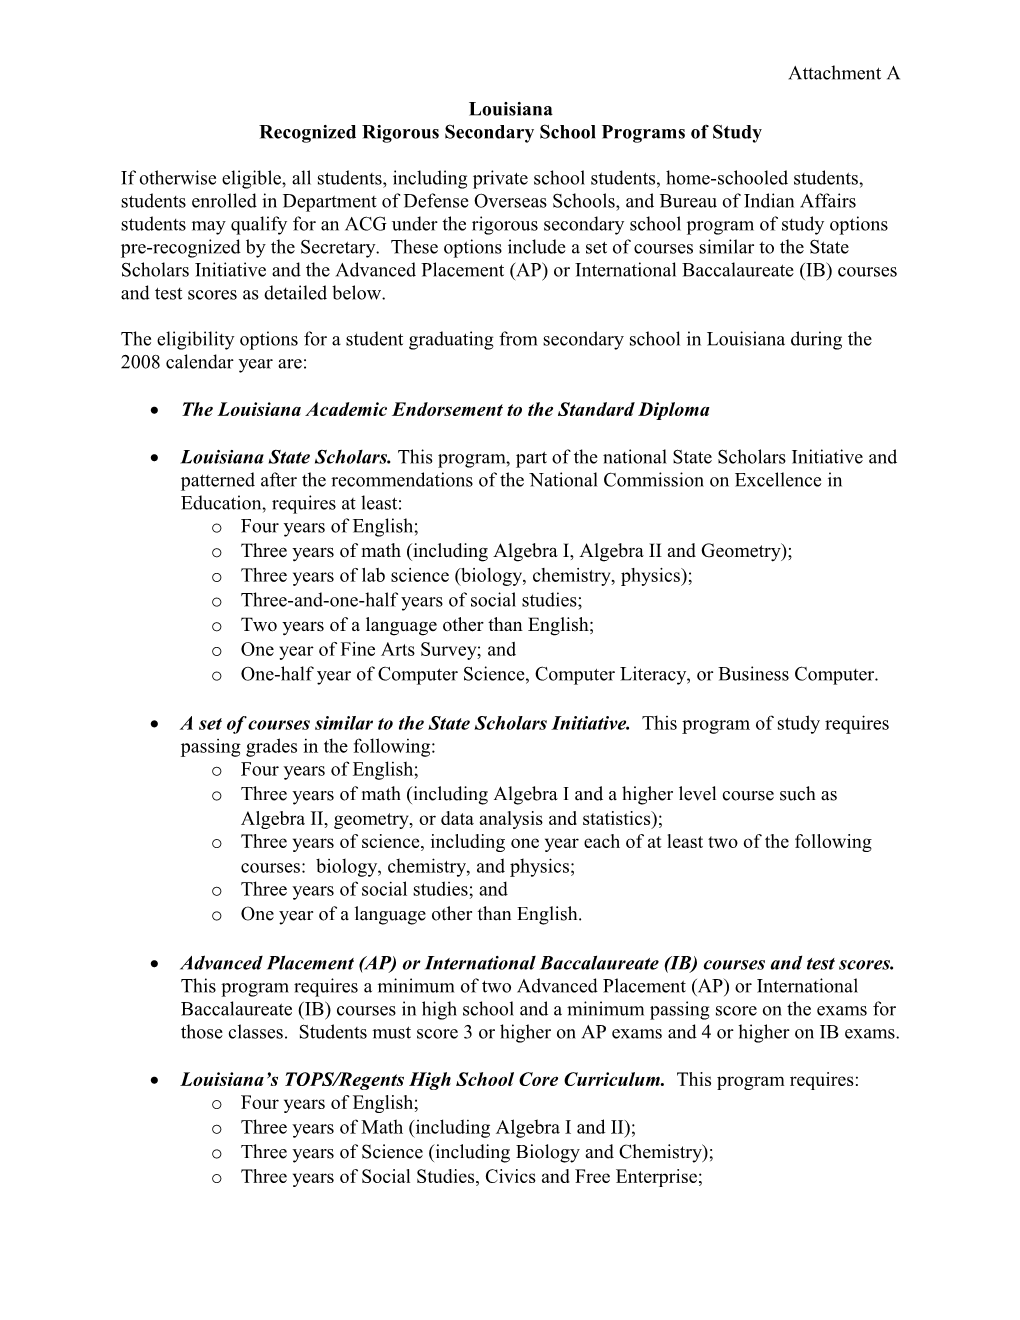 Academic Competitiveness Grants - Attachment to Louisiana Letter - 2008 (MS Word)